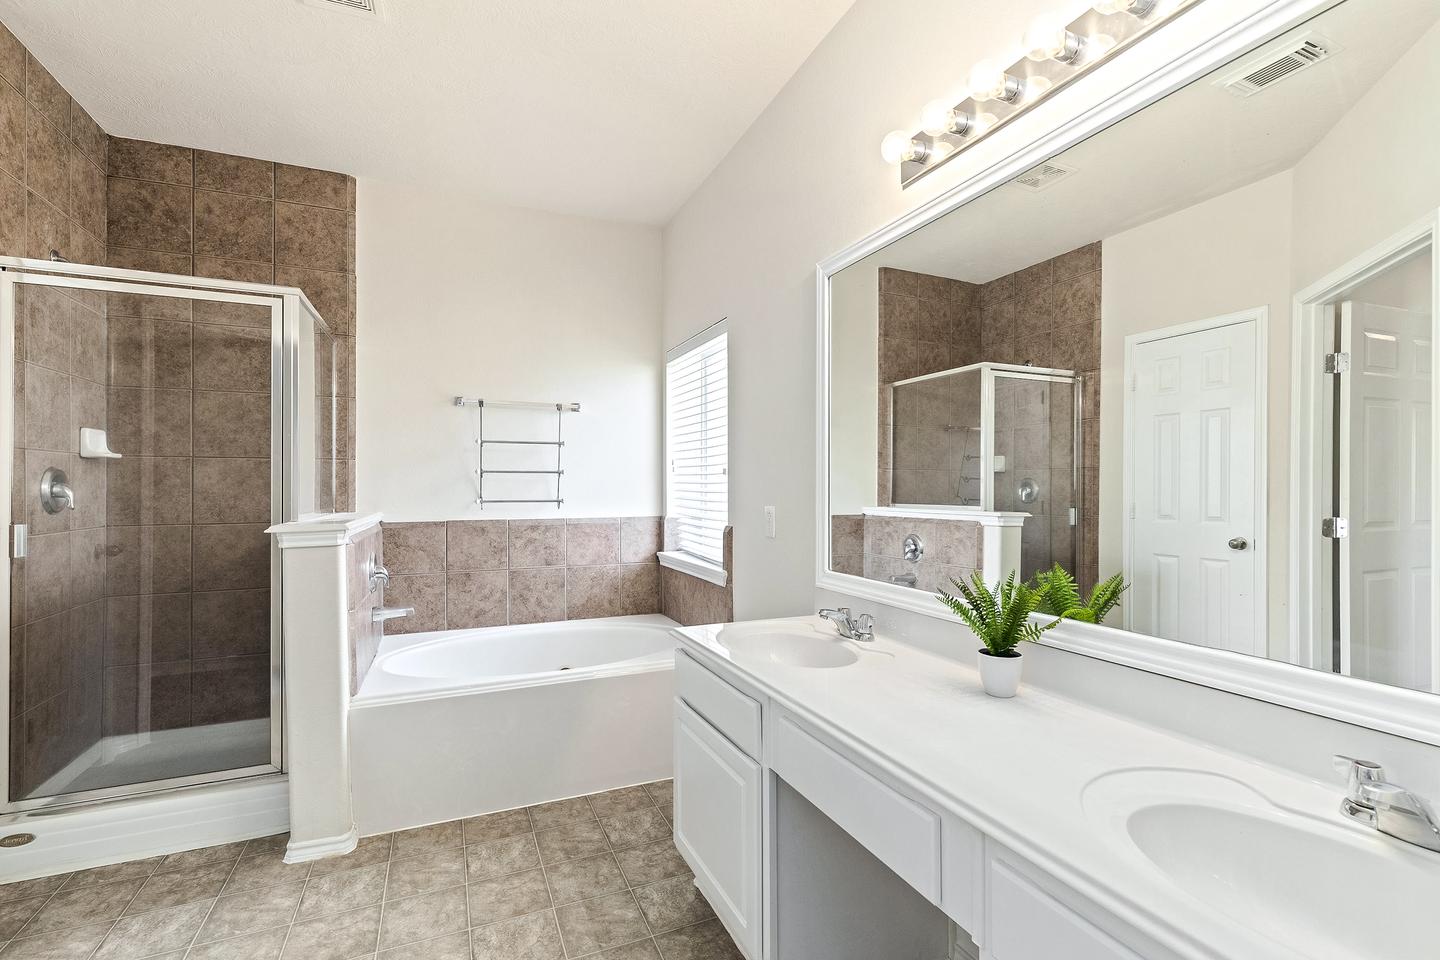 Double vanity anyone? This luxurious bathroom has standup shower and separate large tub!